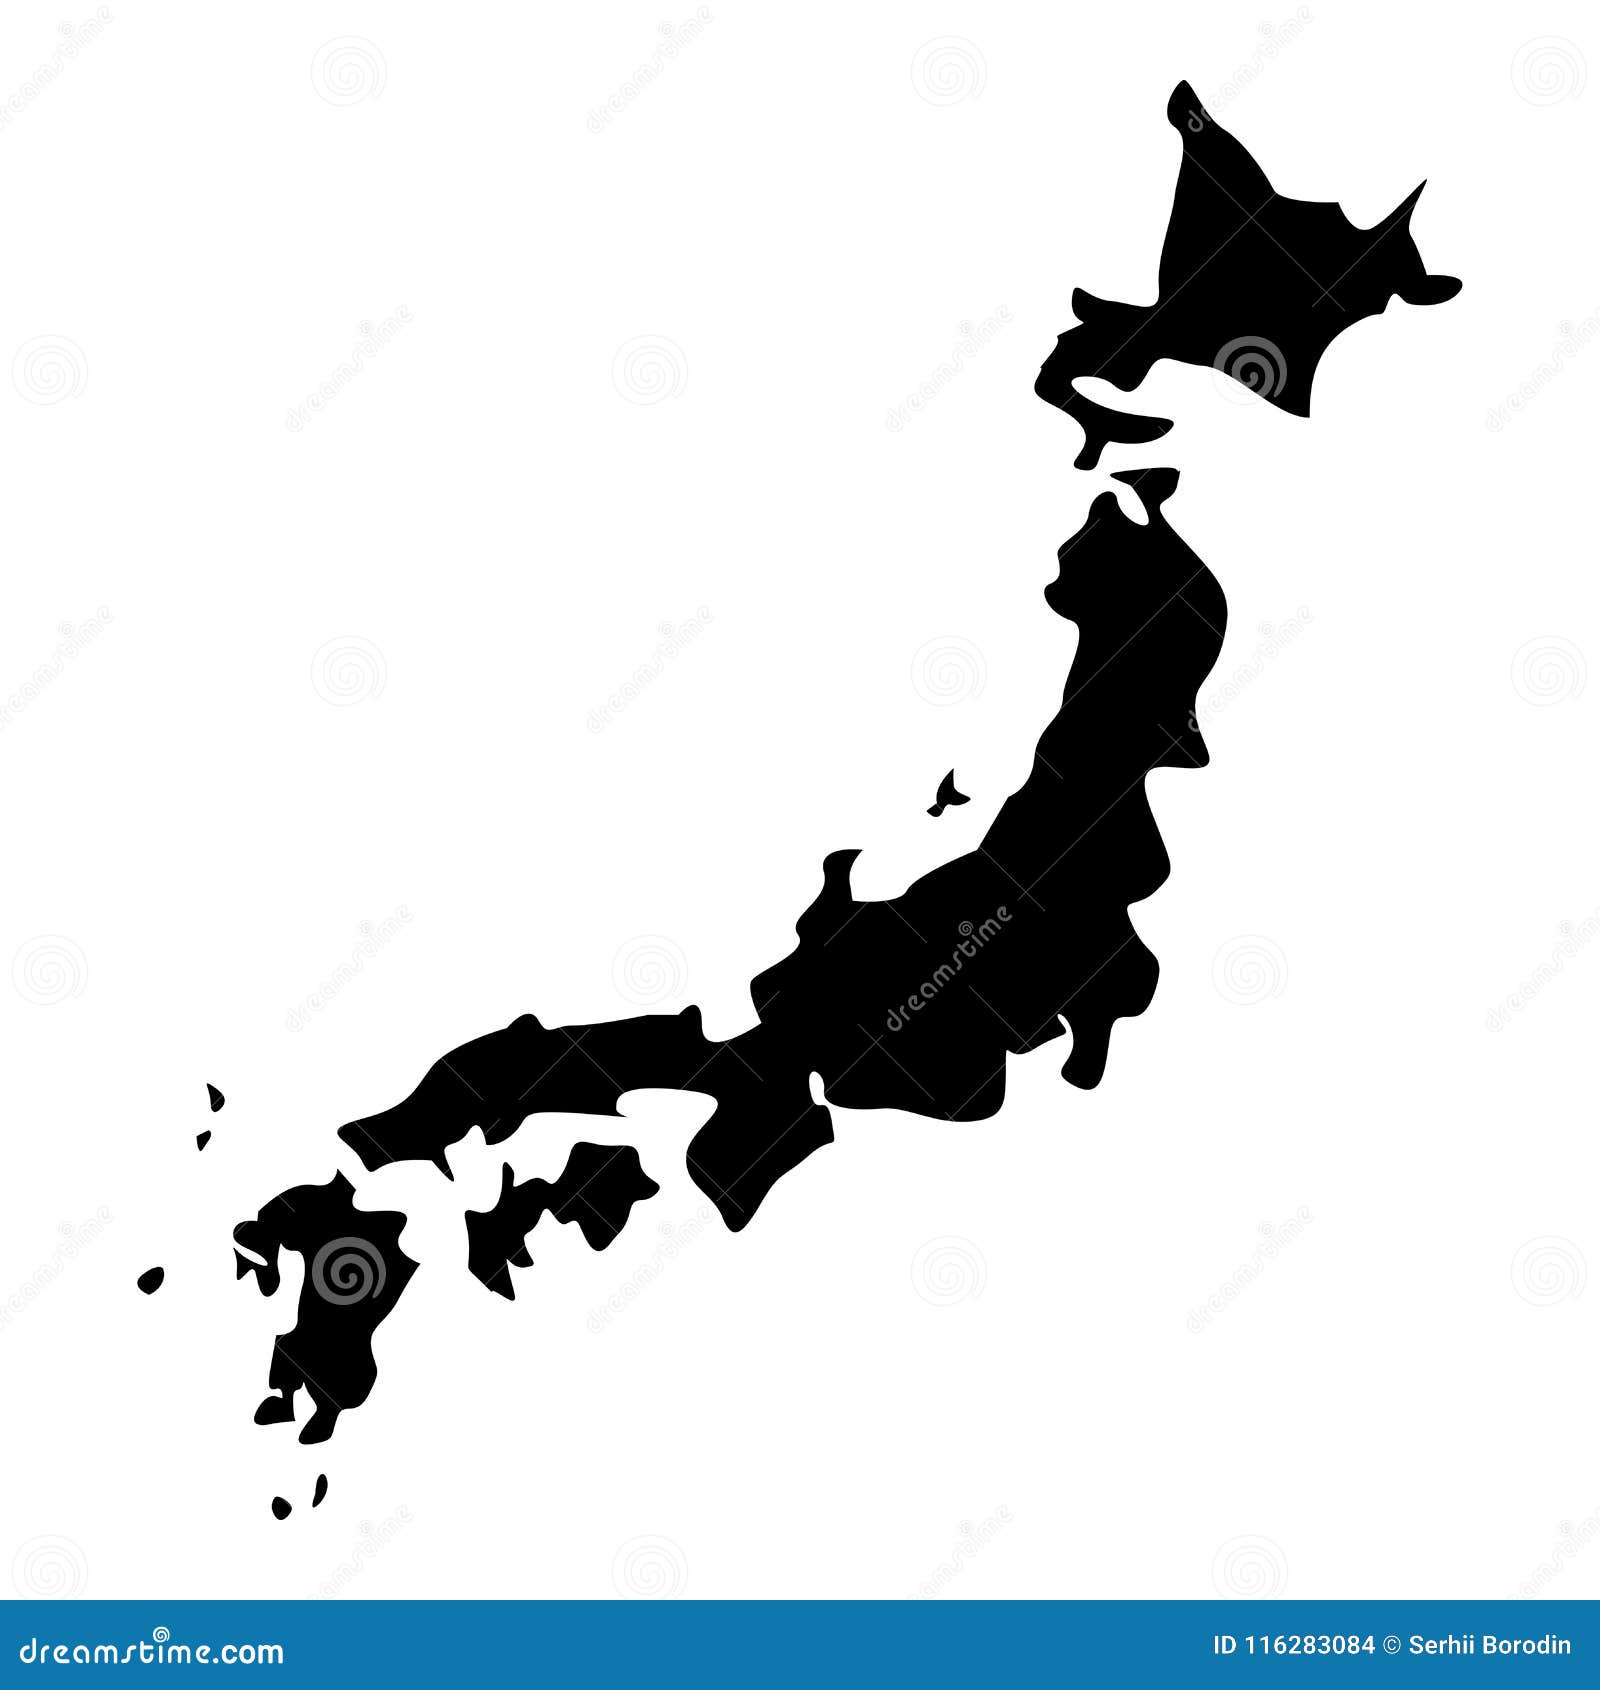 map of japon icon black color  flat style simple image